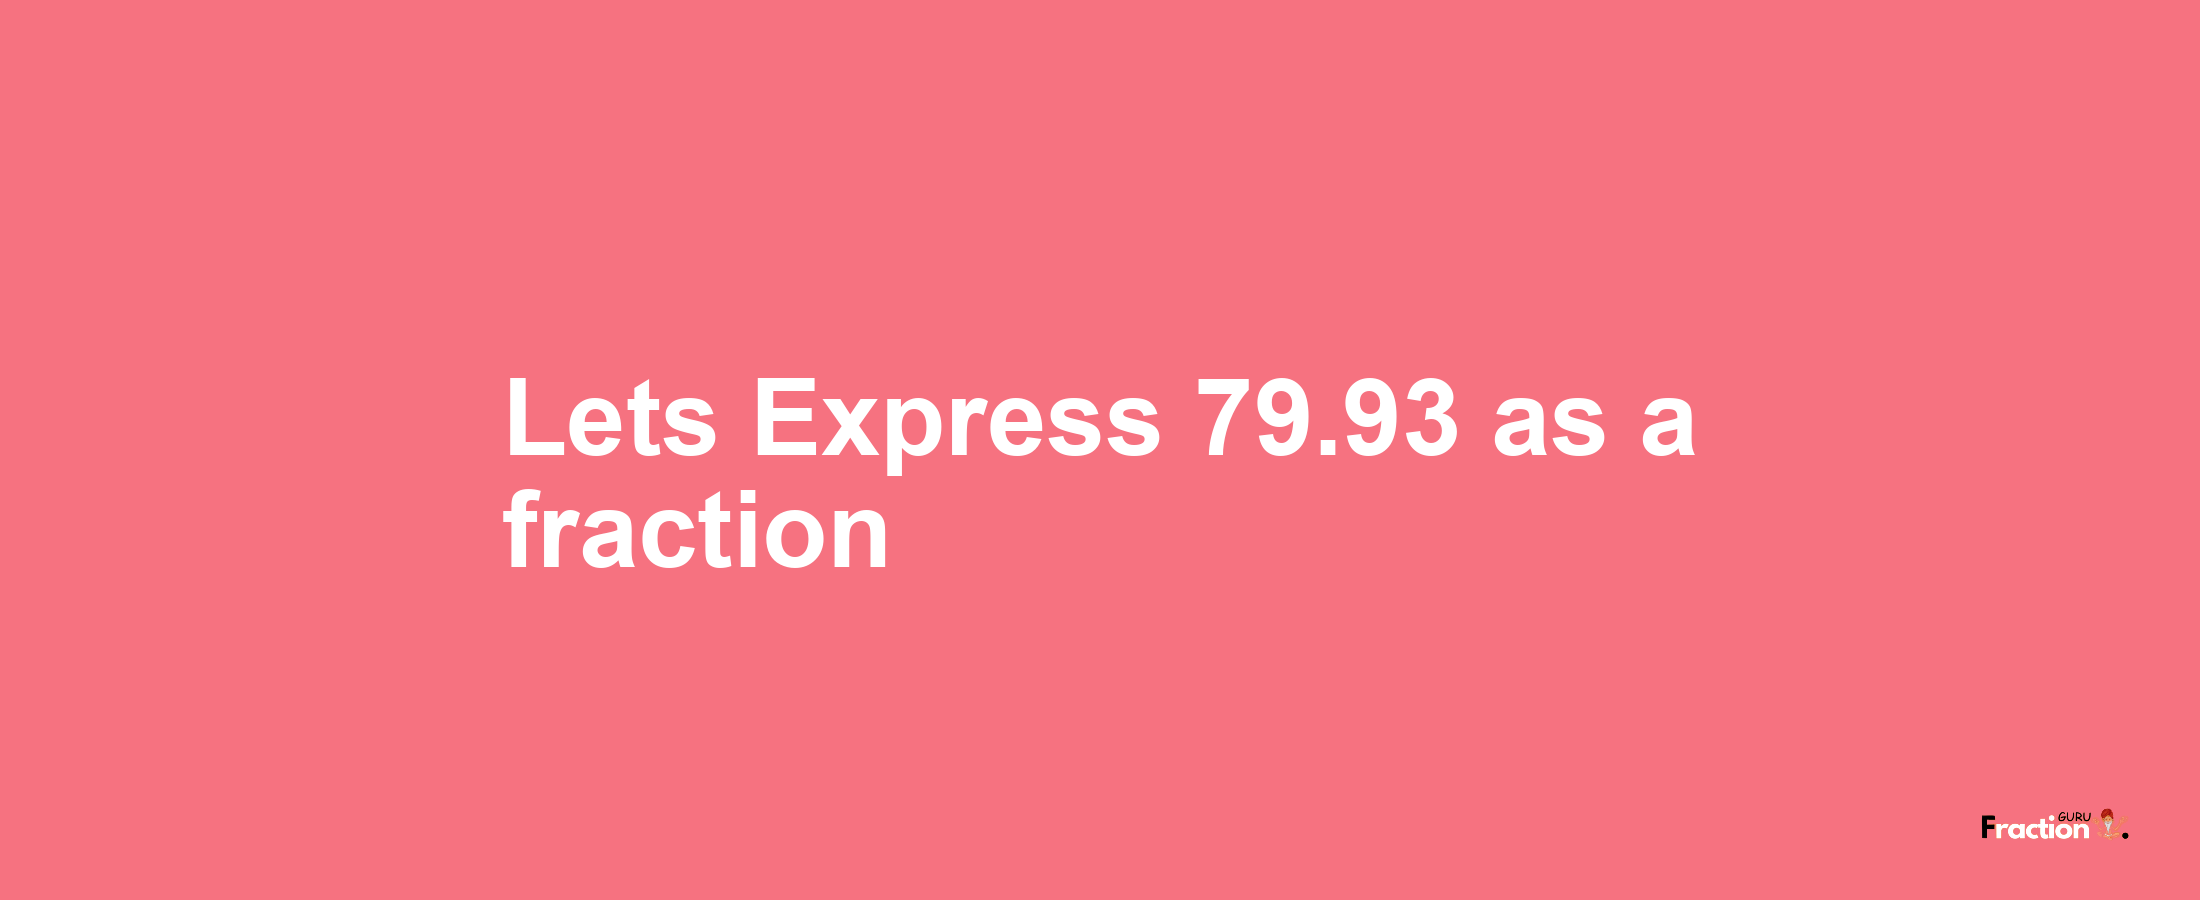 Lets Express 79.93 as afraction